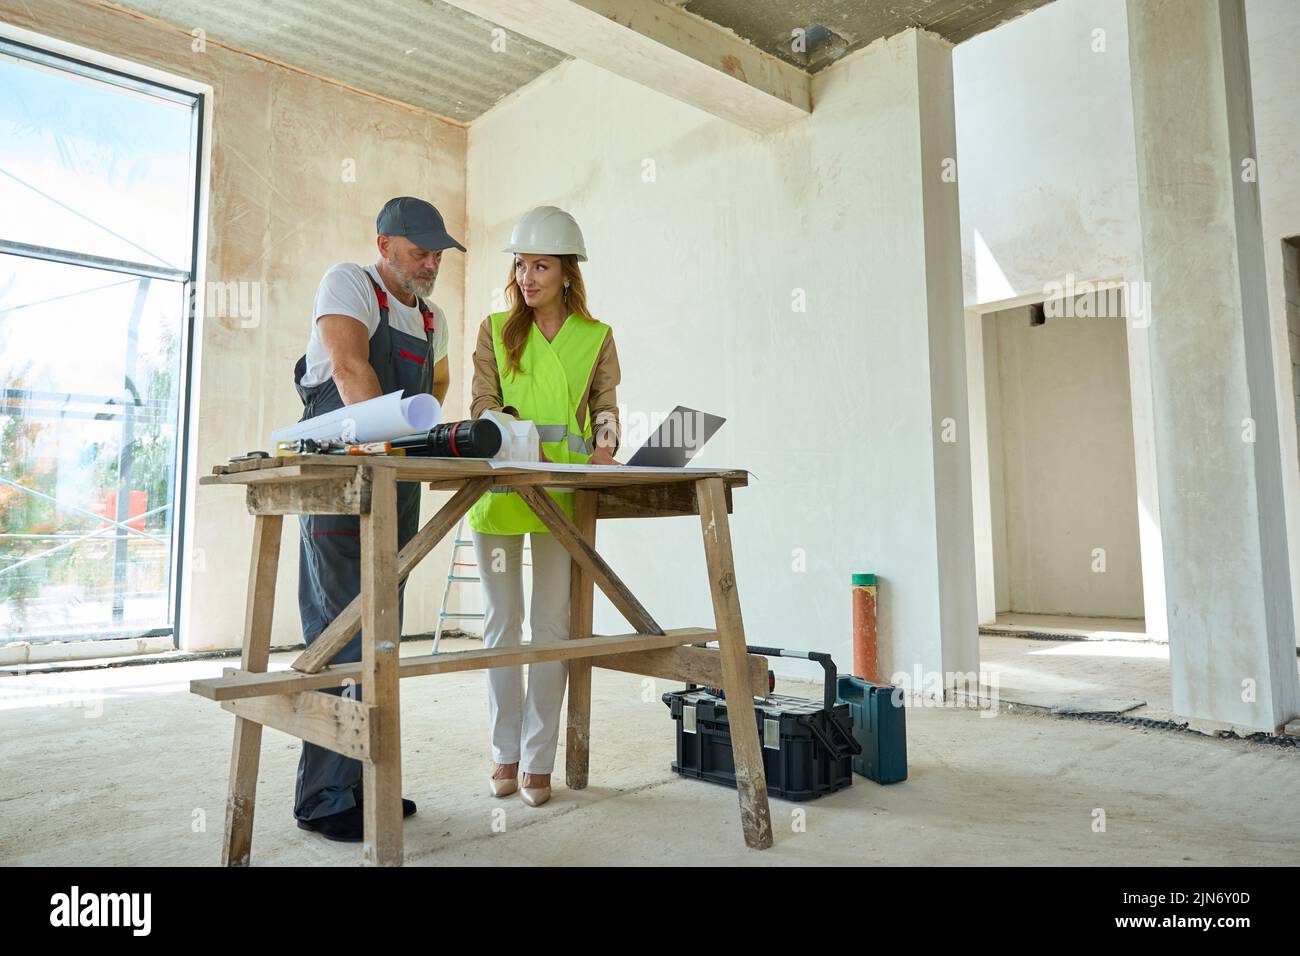 Realtor shows builder blueprints and laptop that lies on table Stock Photo